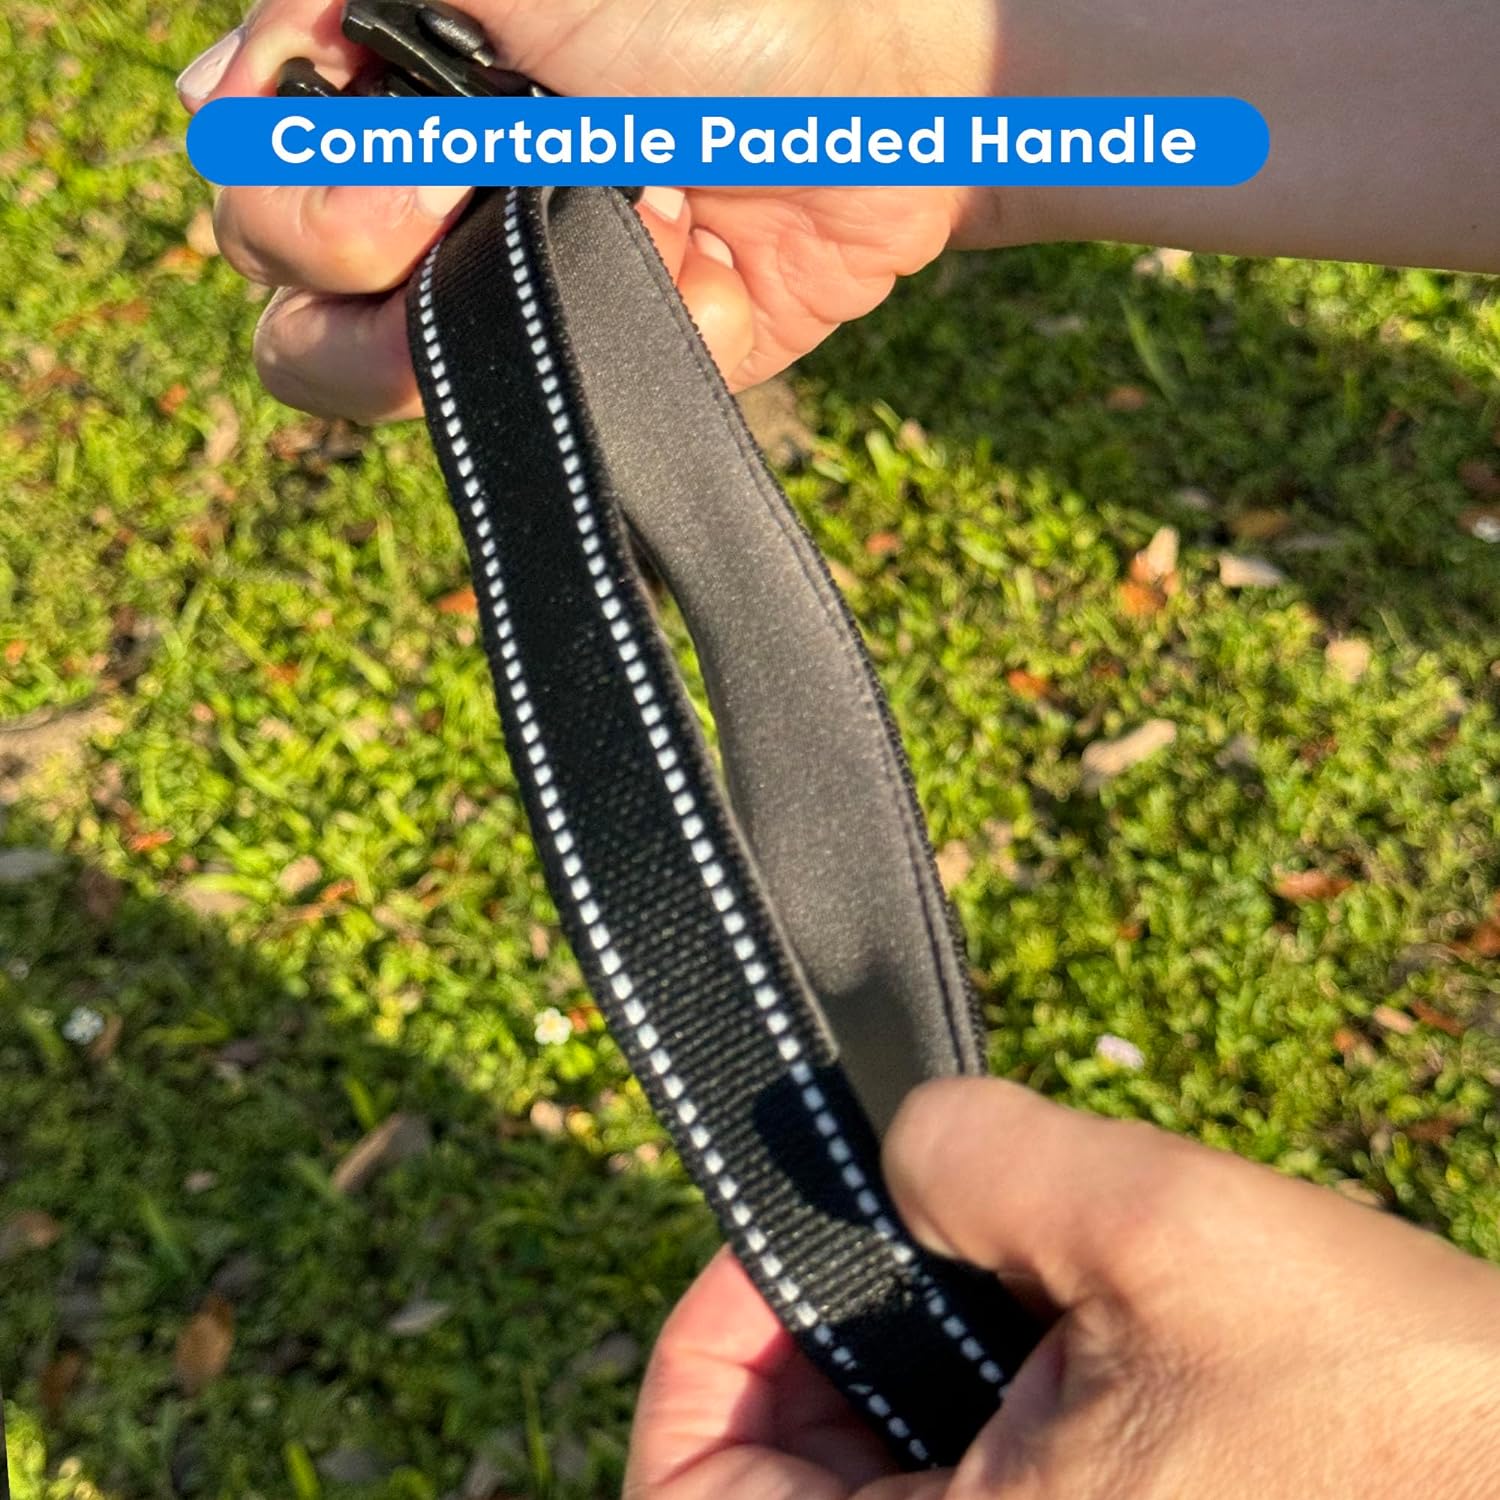 Pawtitas Hands Free Running Dog Lead | 1.8 M Reflective Dog Lead Comfortable Padded Handle | Puppy Dog Training Double Handle Reflective Lead | Reflective Short Dog Lead for Training - Black Lead :Pet Supplies